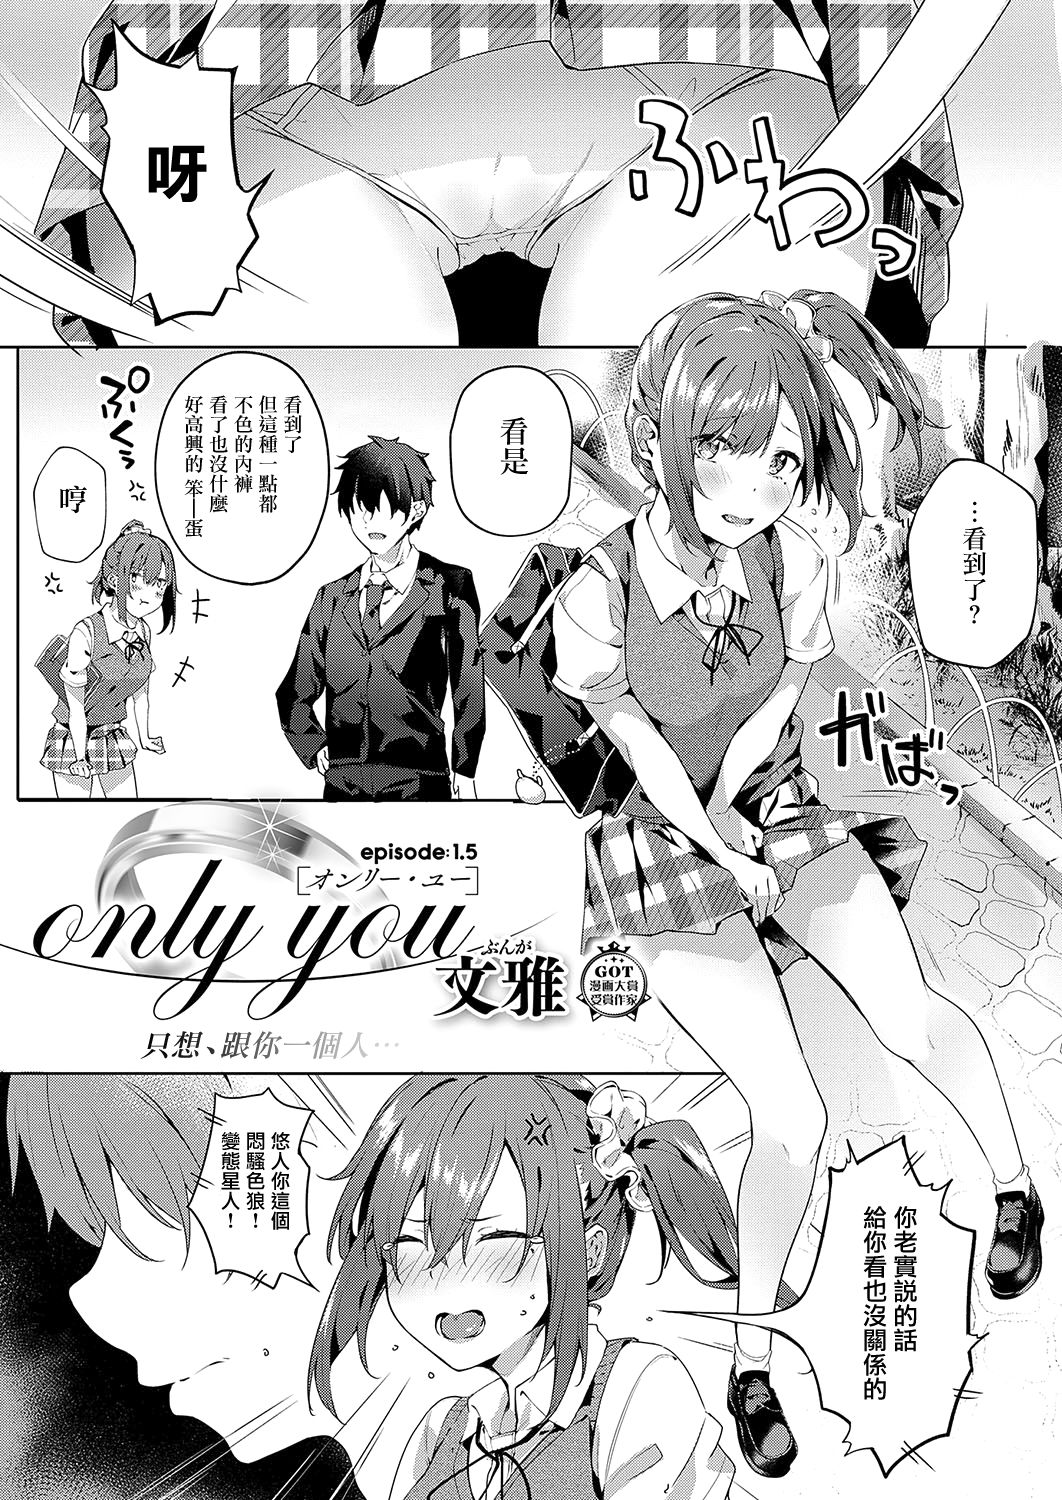 [Bunga] only you 1.5 (COMIC ExE 19) [Chinese] [无毒汉化组] [Digital] [文雅] only you 1.5 (コミック エグゼ 19) [中国翻訳] [DL版]